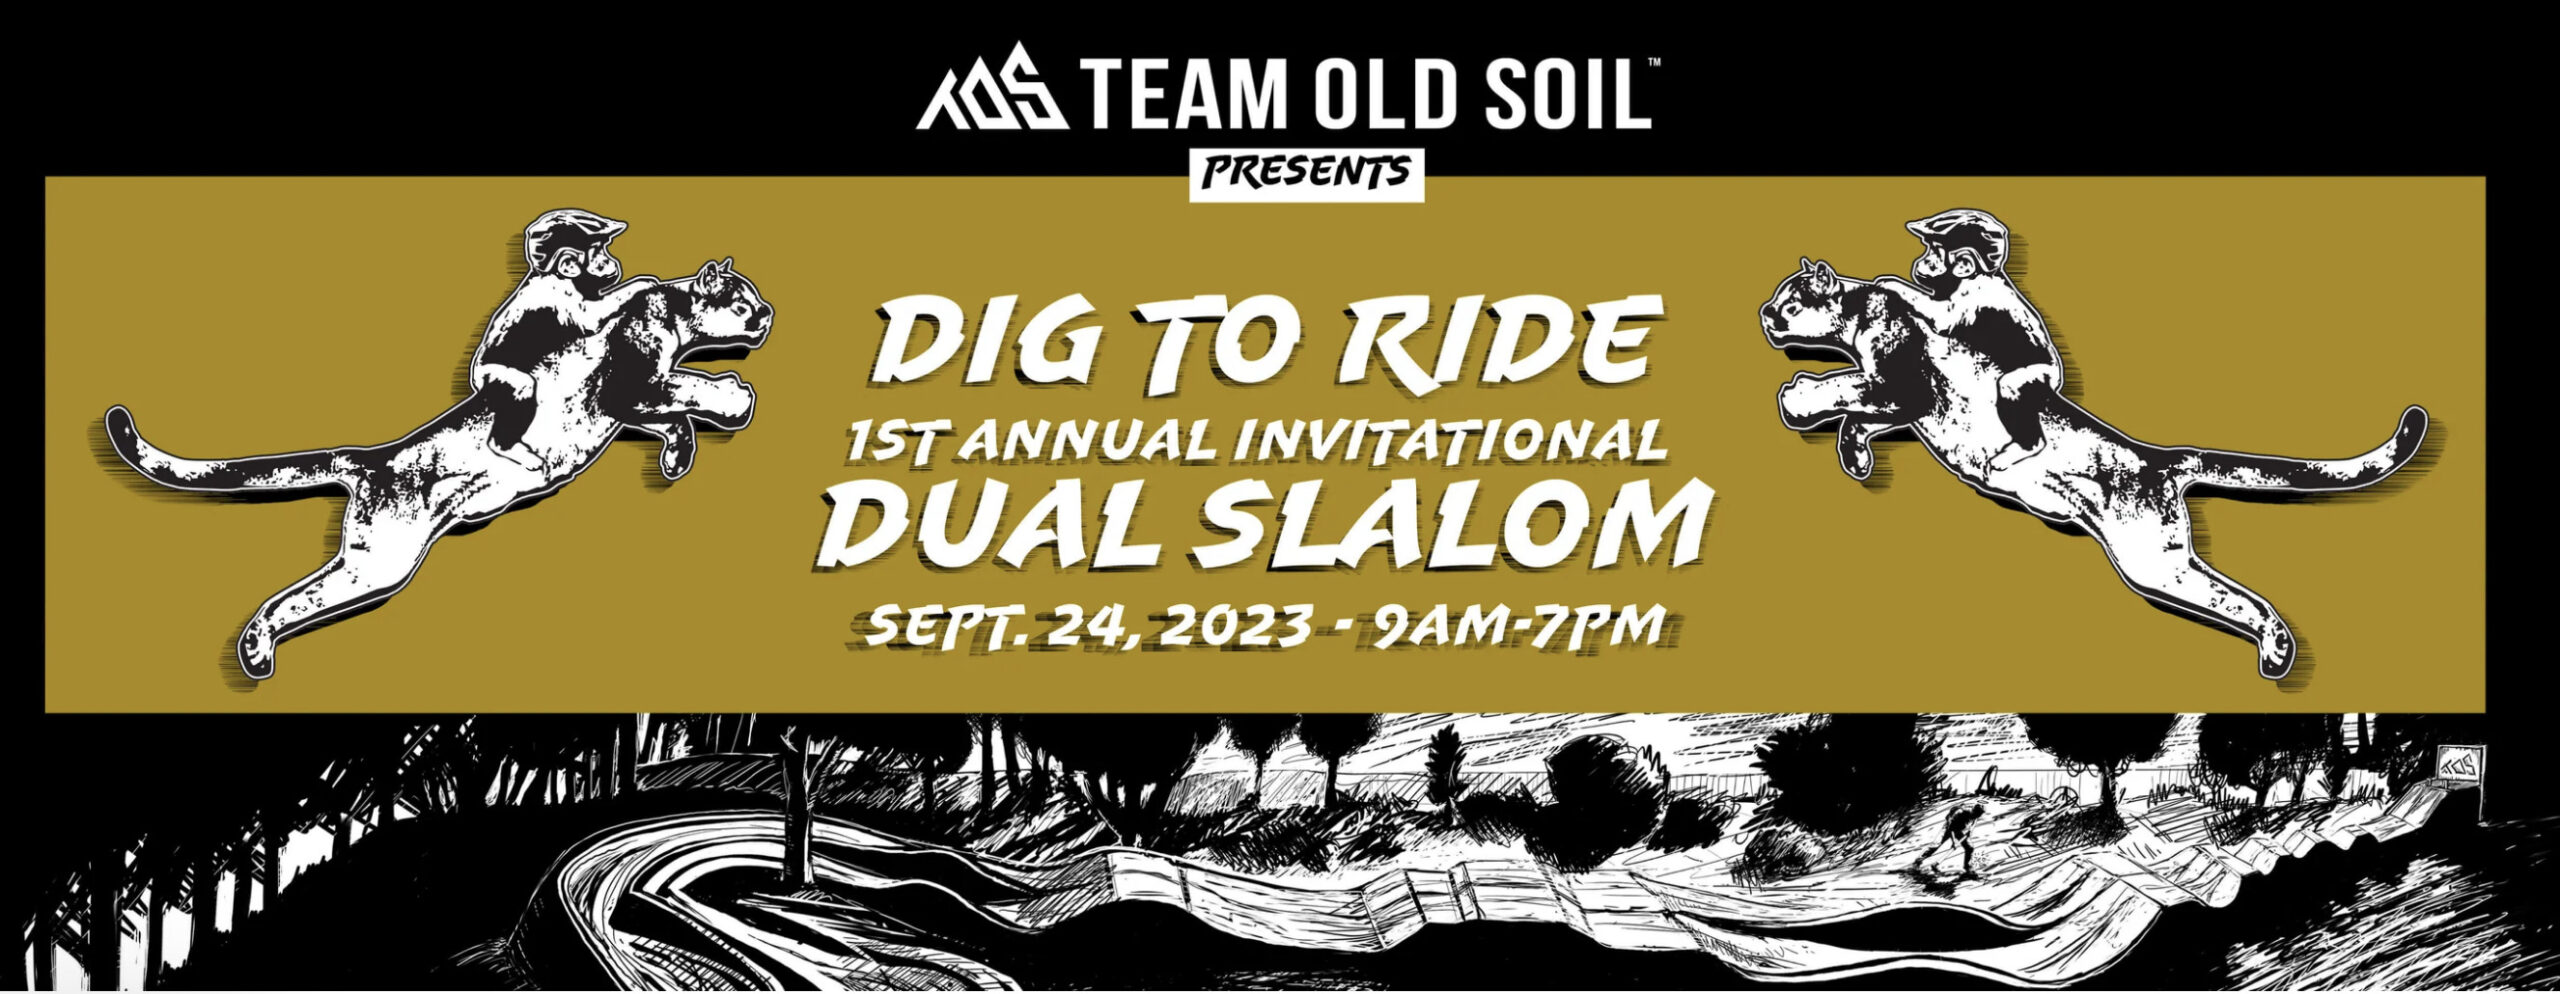 Illustration of Dig to Ride Dual Slalom logo with trail sketched in the background